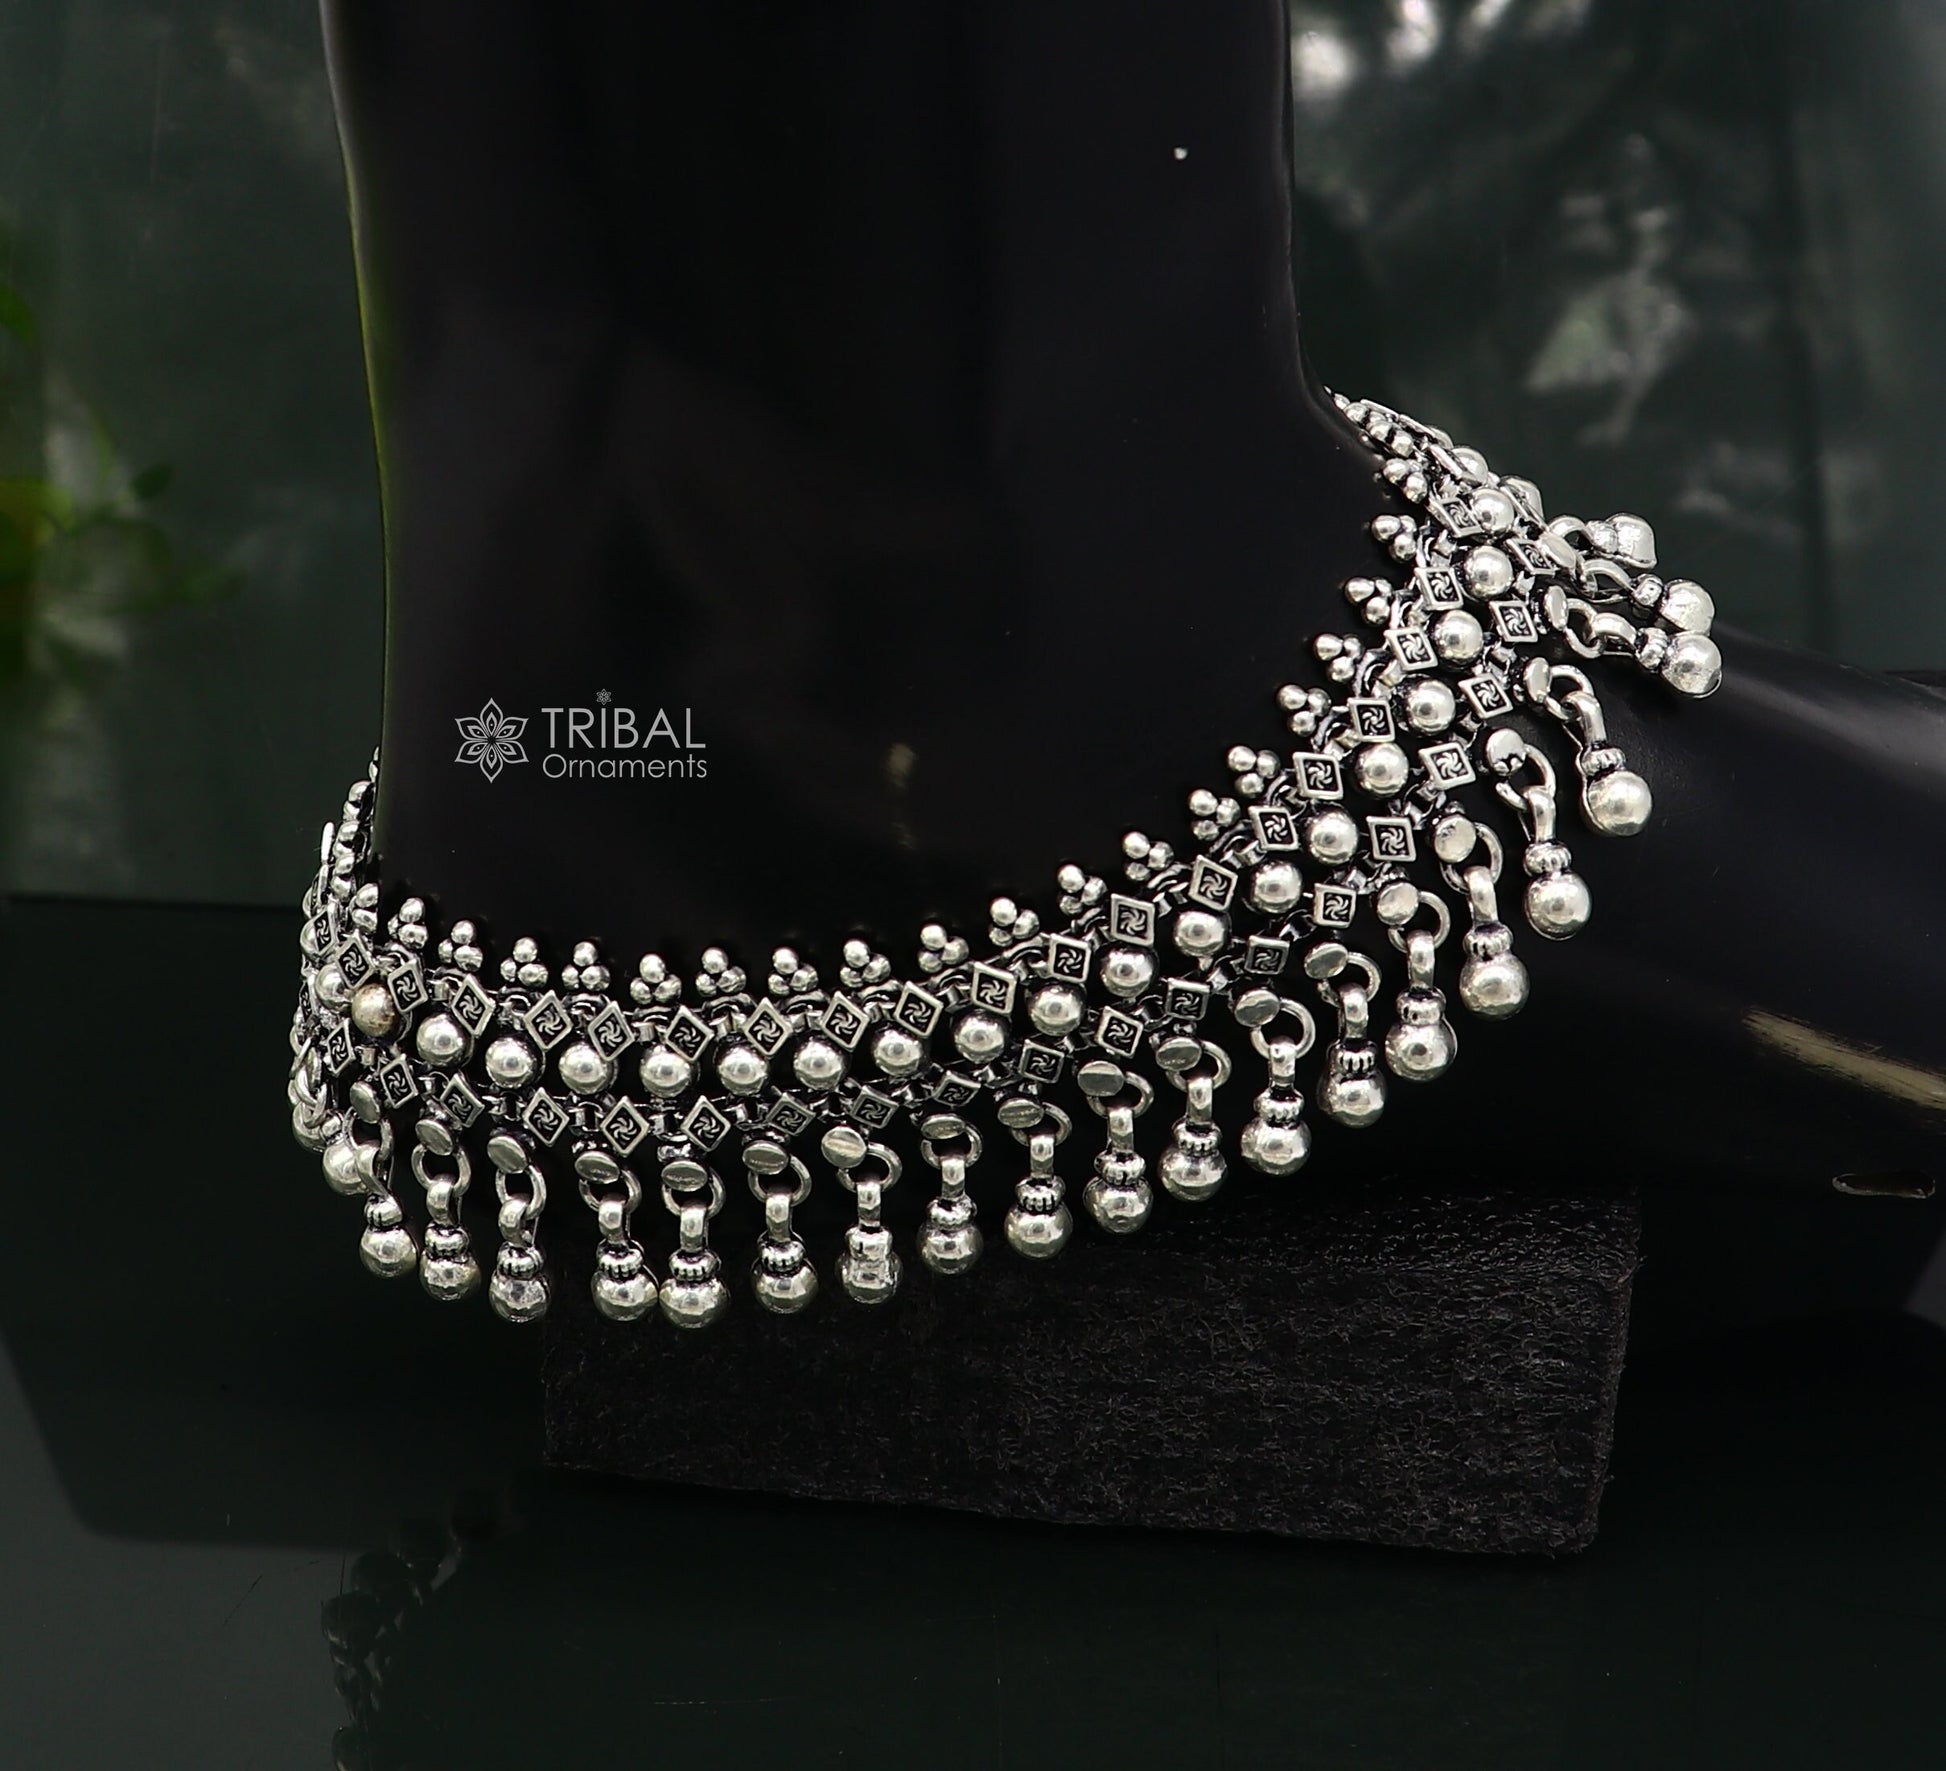 925 sterling silver handmade amazing charming hanging drops vintage style anklets, foot bracelet trendy Wedding anklets jewelry ank598 - TRIBAL ORNAMENTS